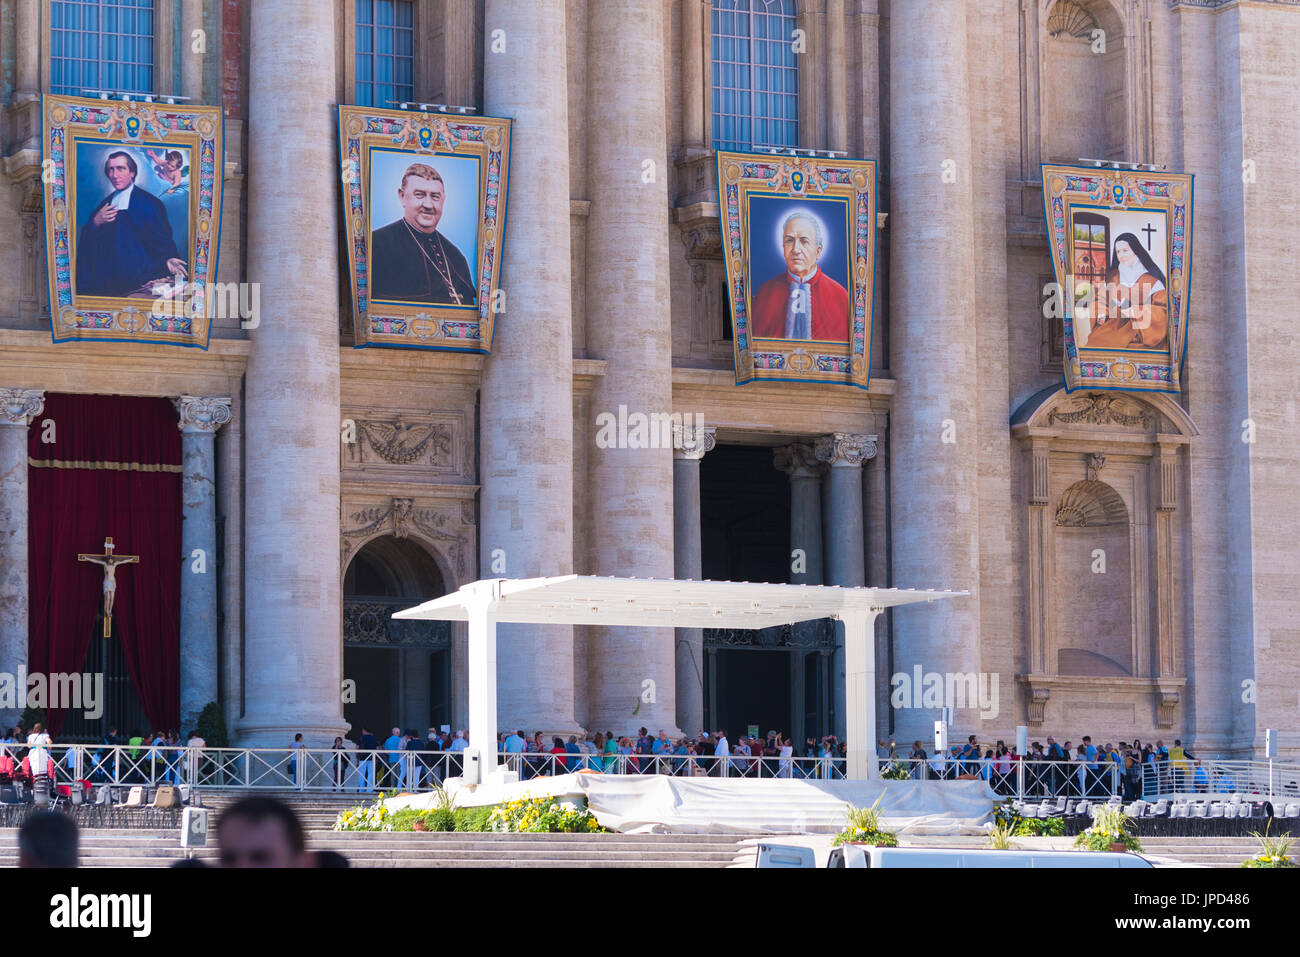 VATICAN CITY, VATICAN - OCTOBER 16, 2016: Pope's speech stage in front of St Peter's Basilica on piazza San Pietro Stock Photo